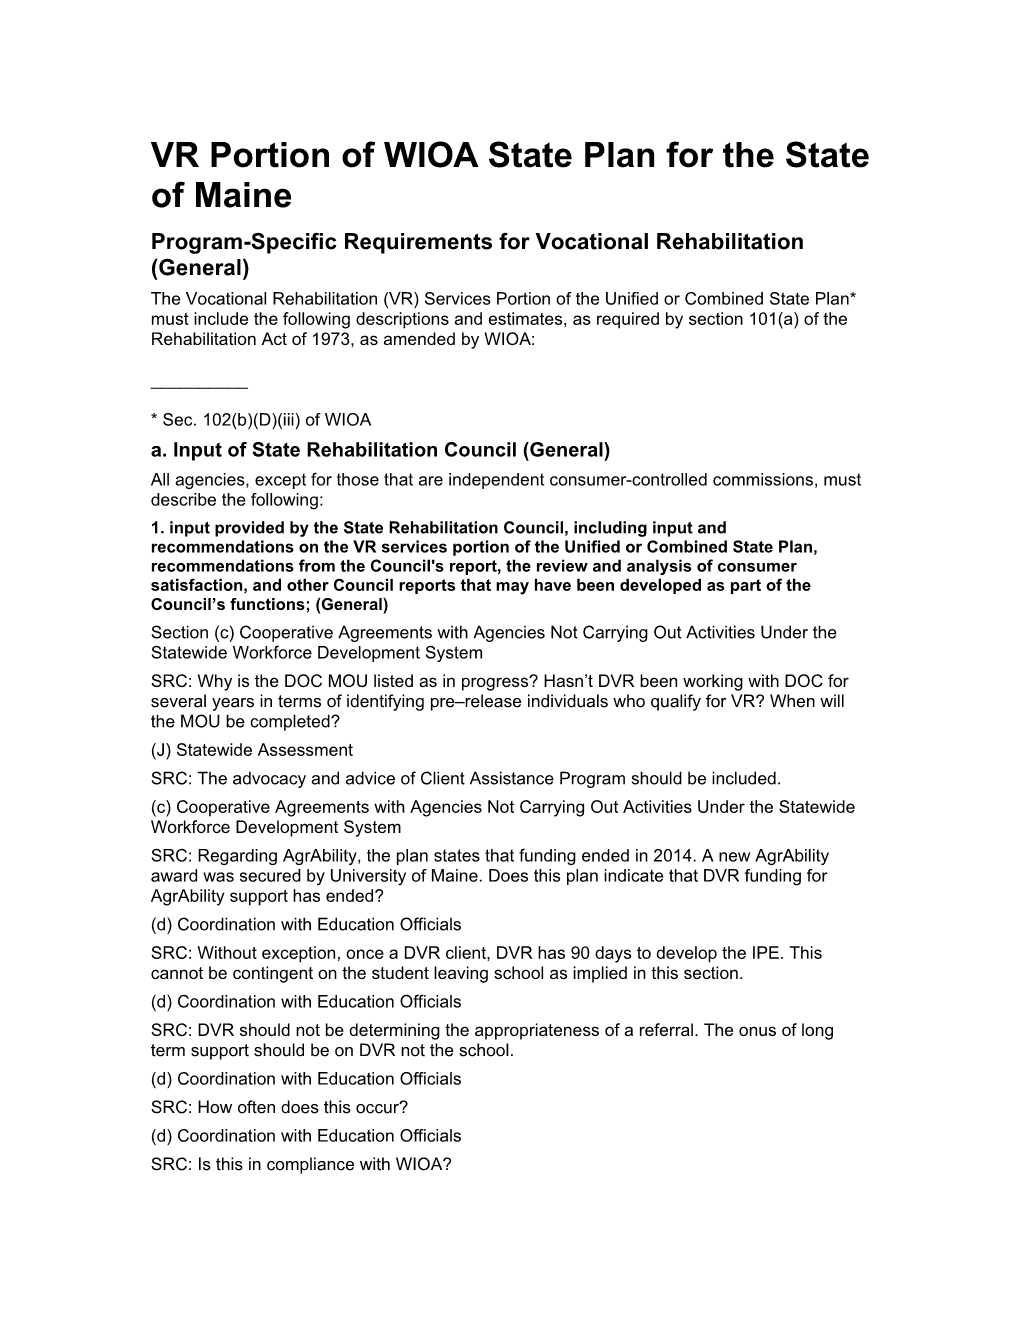 VR Portion of WIOA State Plan for the State of Maine